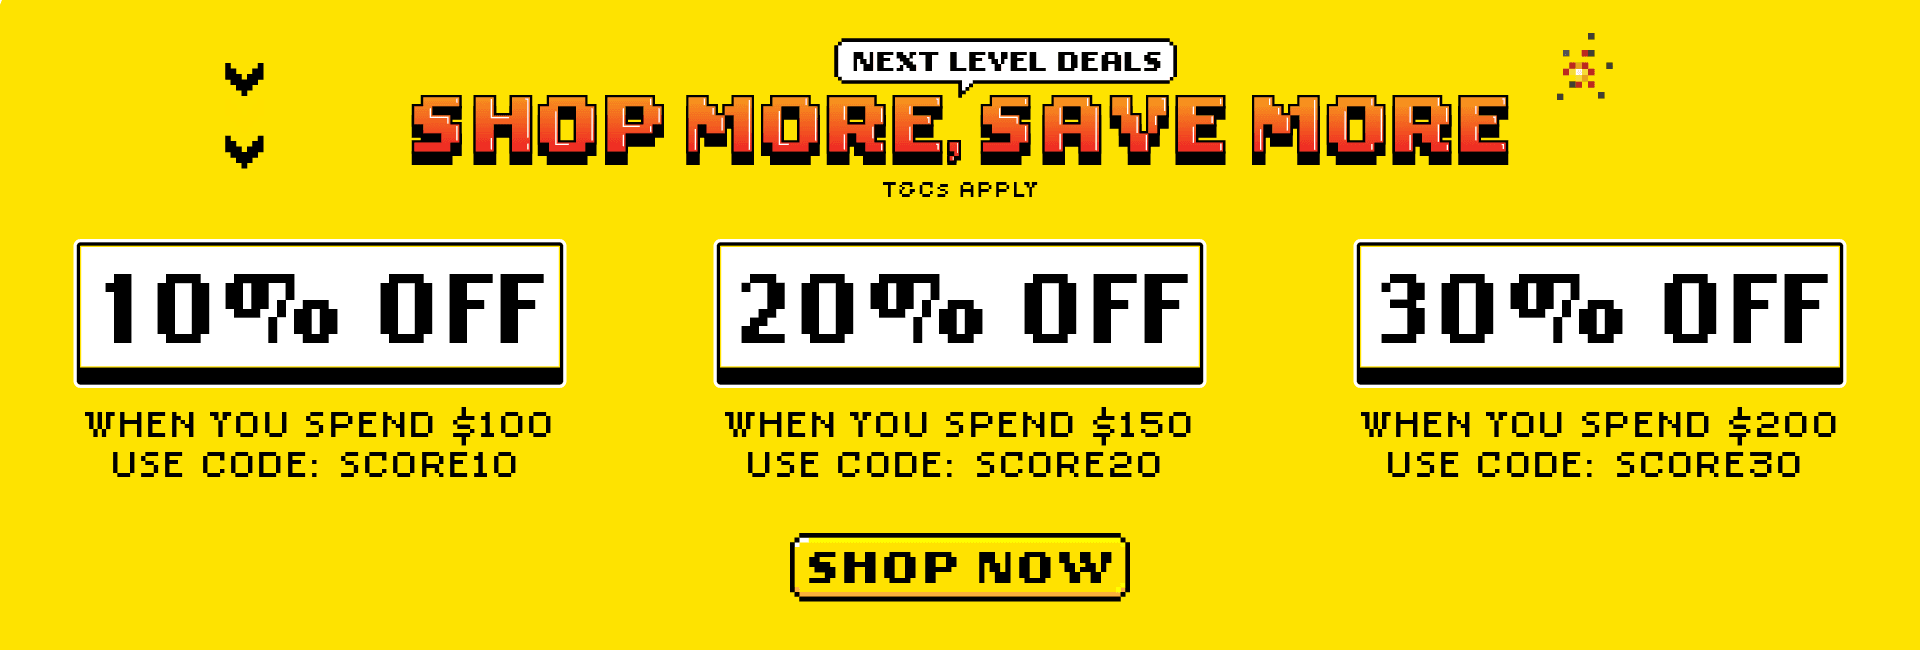 Spend & Save - Extra Up to 30% OFF